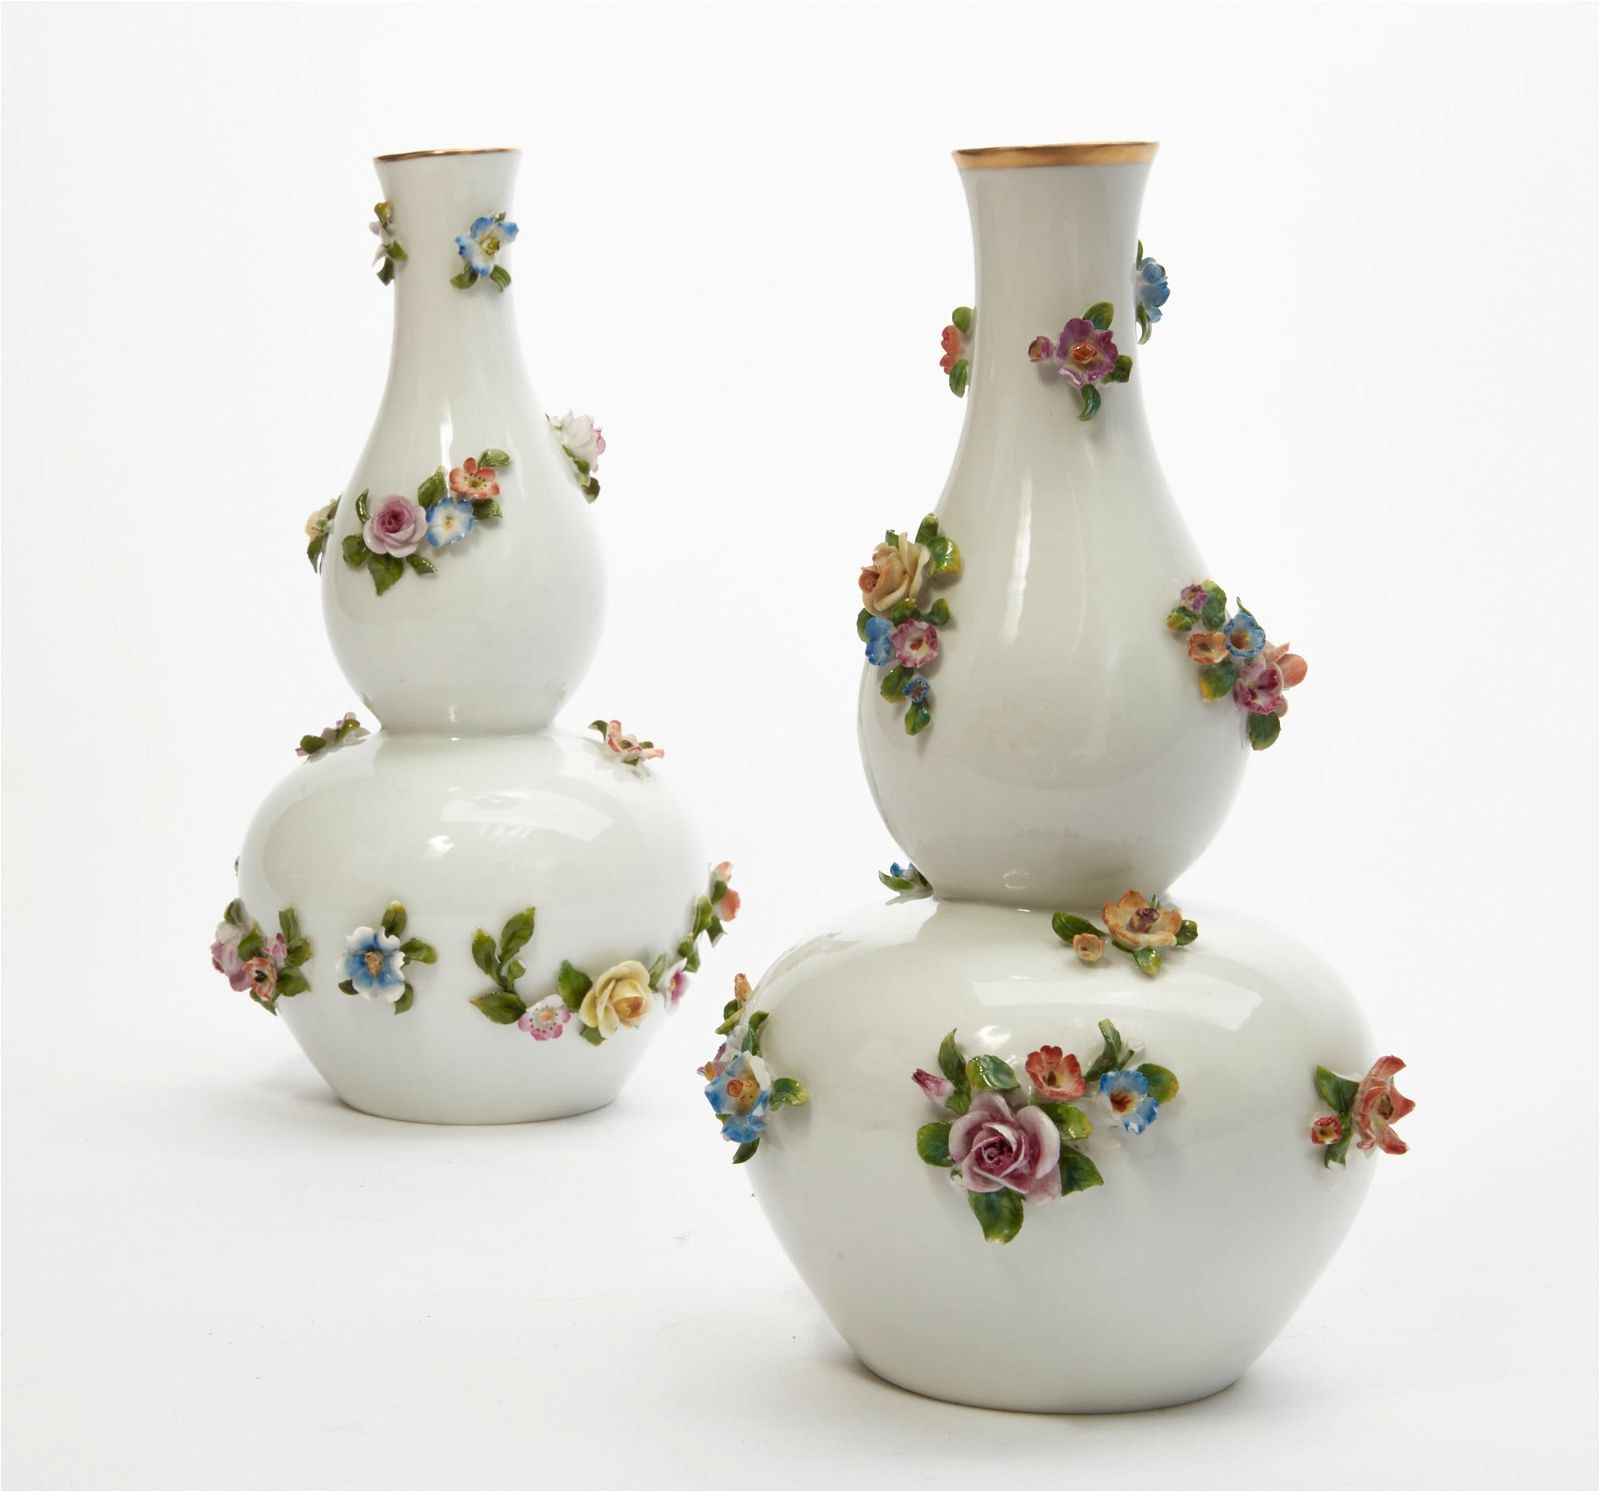 A PAIR OF GERMAN (VOLKSTEDT) PORCELAIN